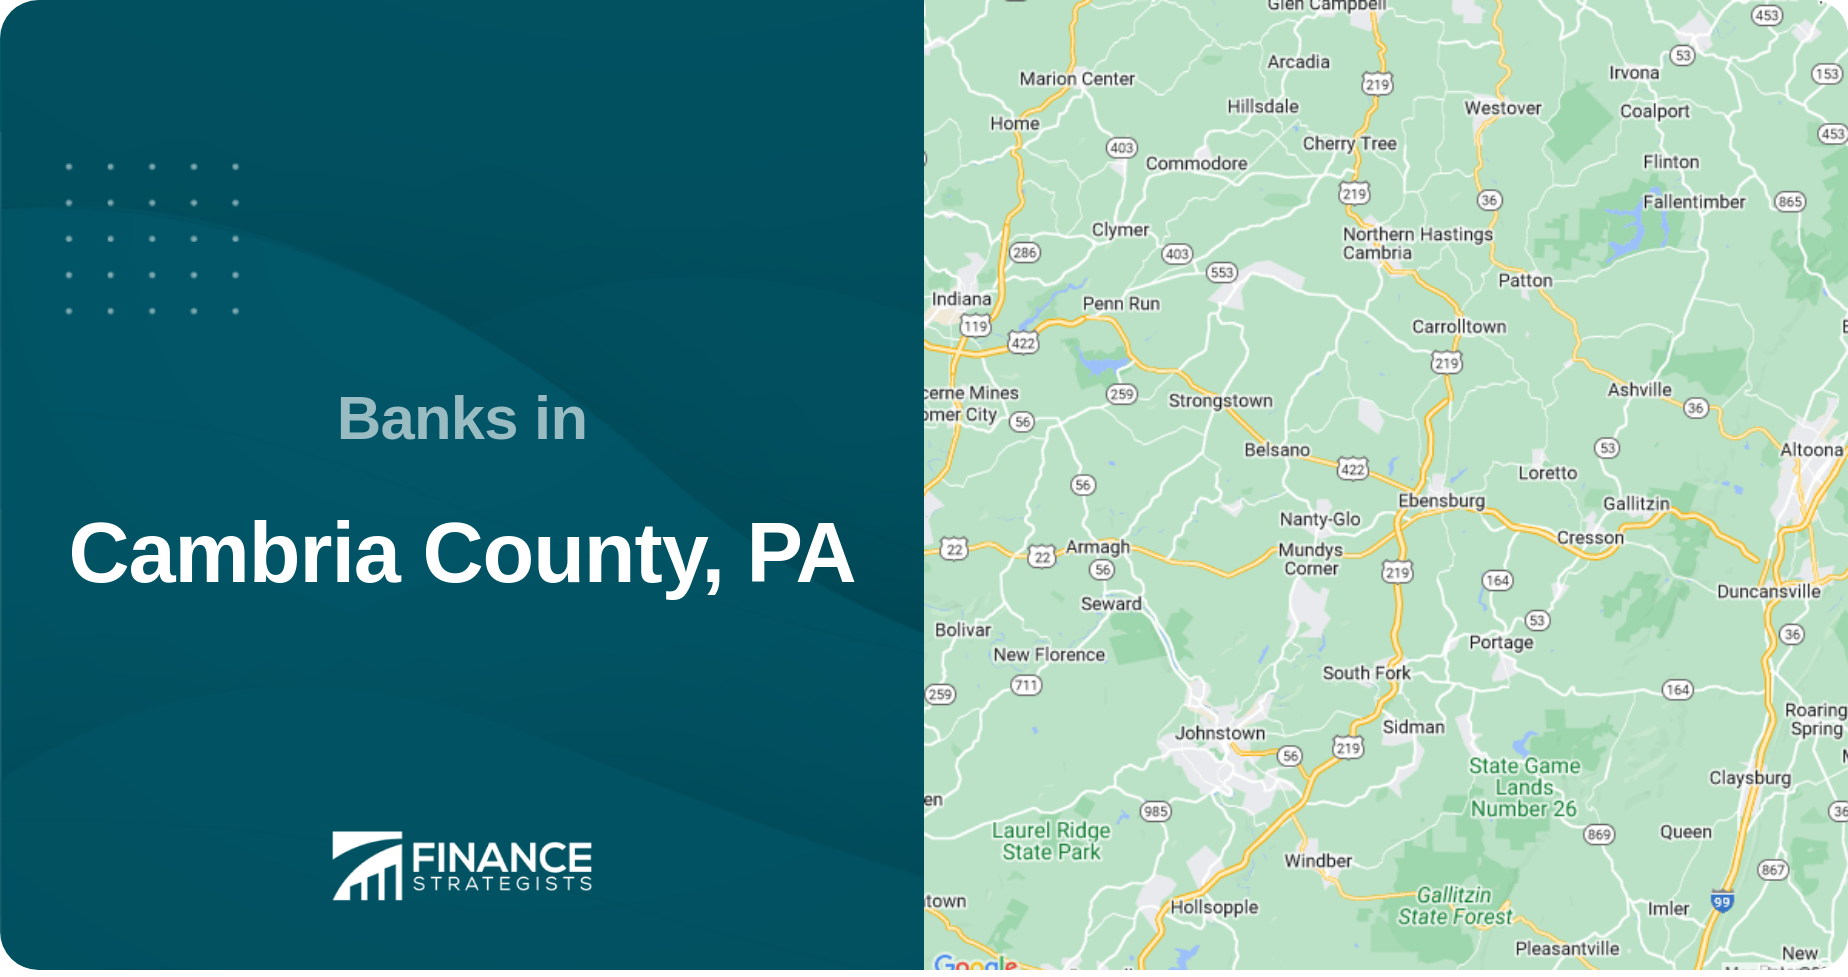 Banks in Cambria County, PA